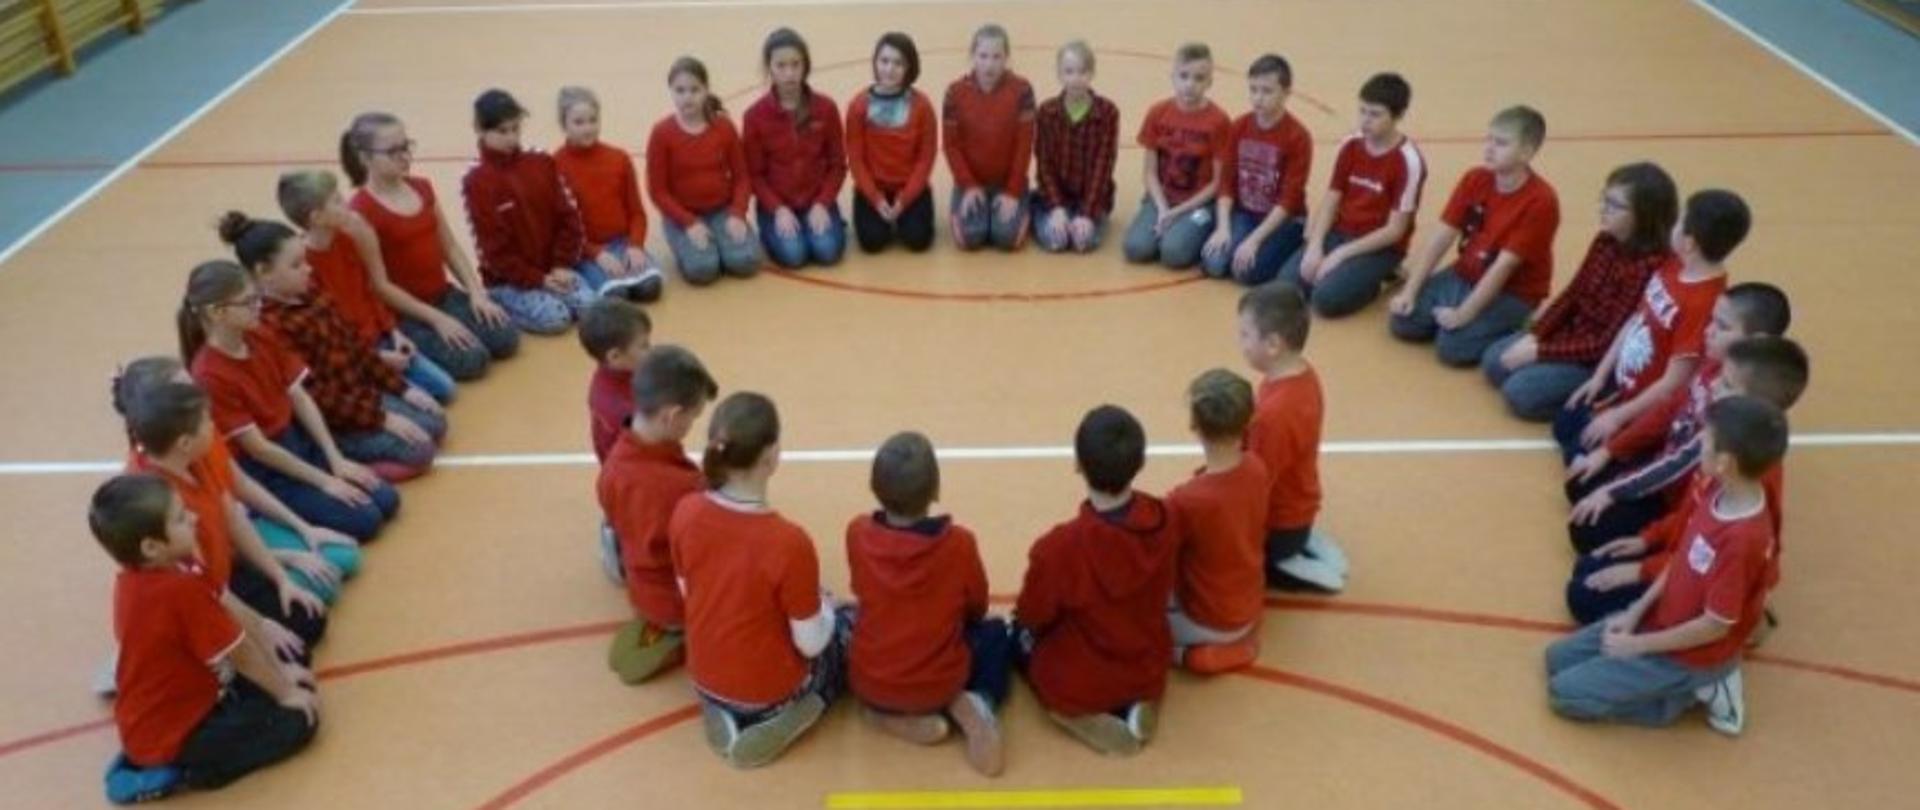 Children in red T-shirts sit on the floor forming the shape of the Polish Aid logo. The inscription "Polish aid" is below.